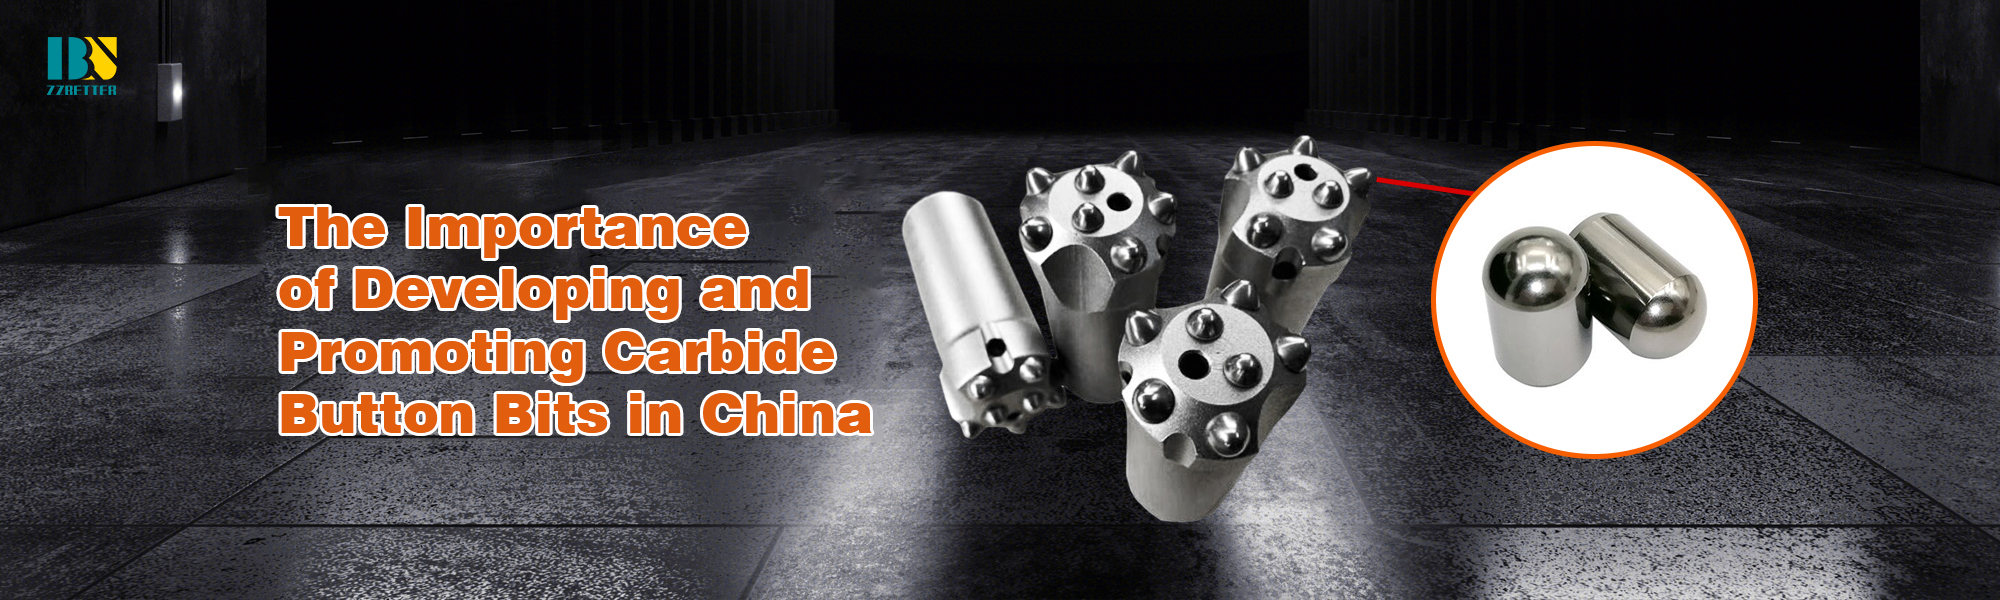 The Importance of Developing and Promoting Carbide Button Bits in China